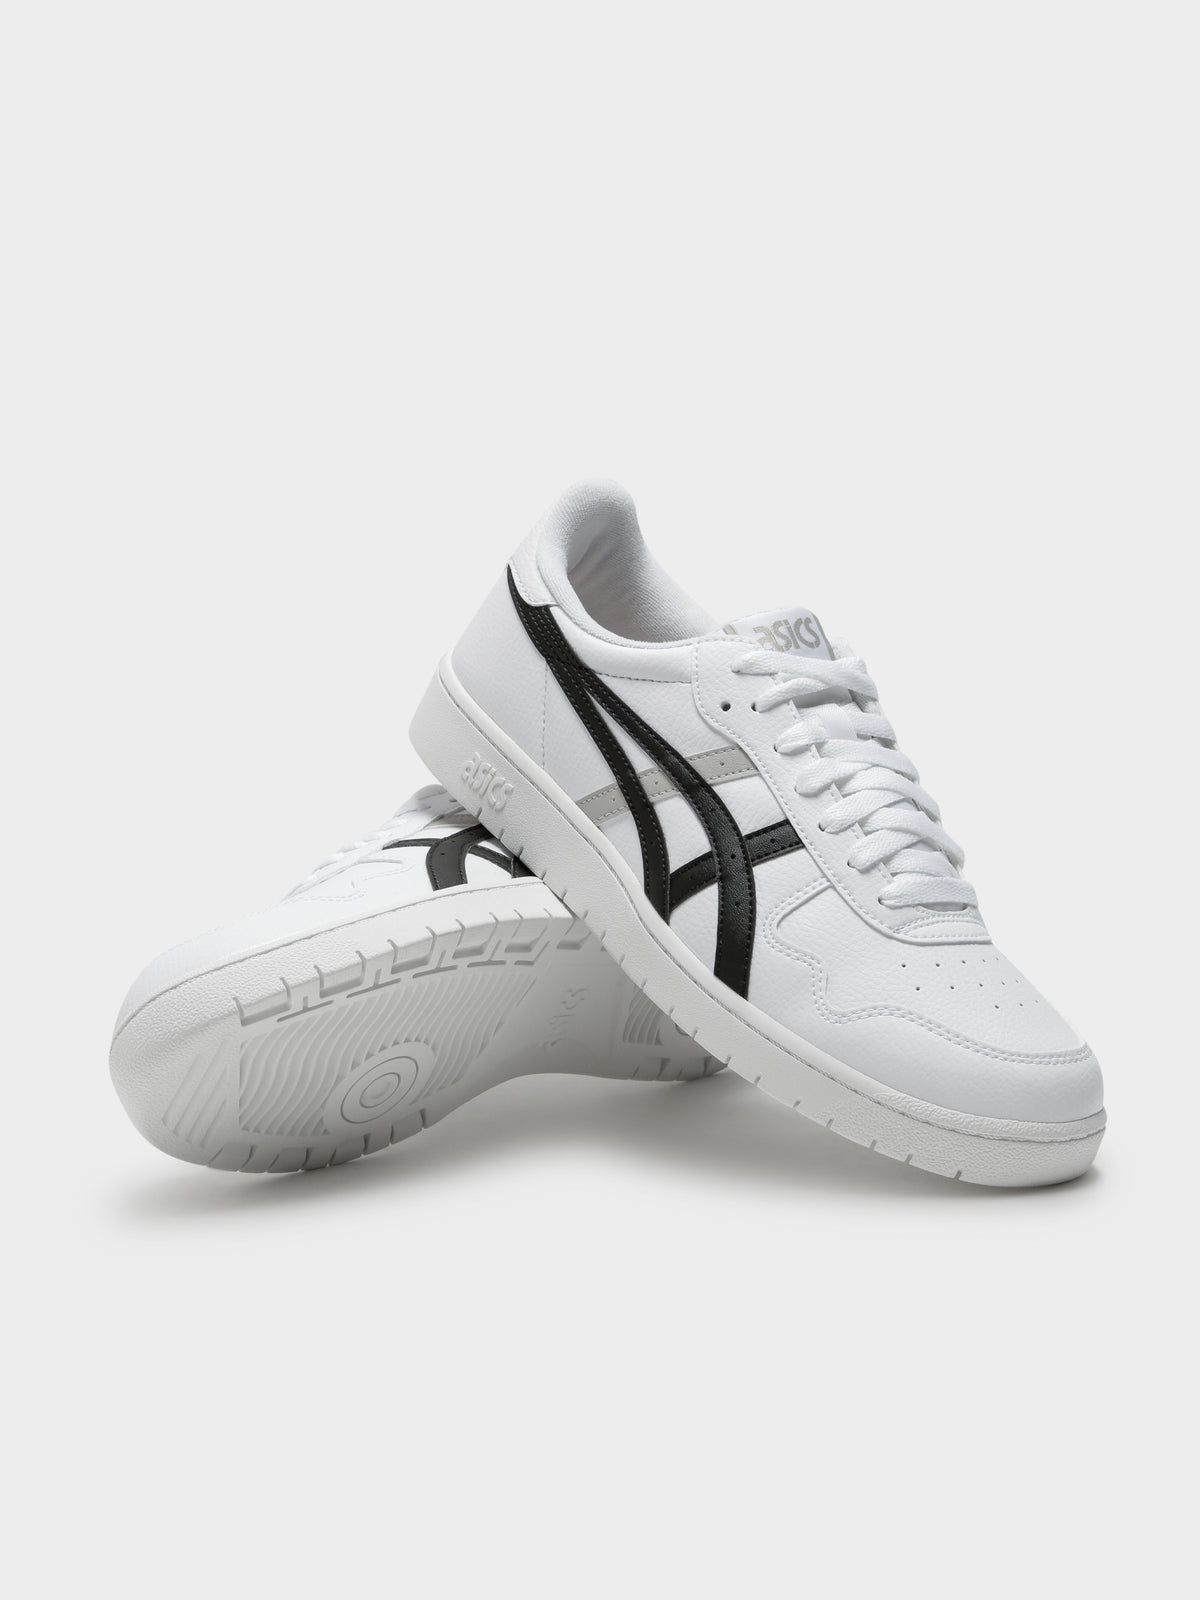 Asics Mens Japan S Sneakers in White & Oyster Grey | White/Grey